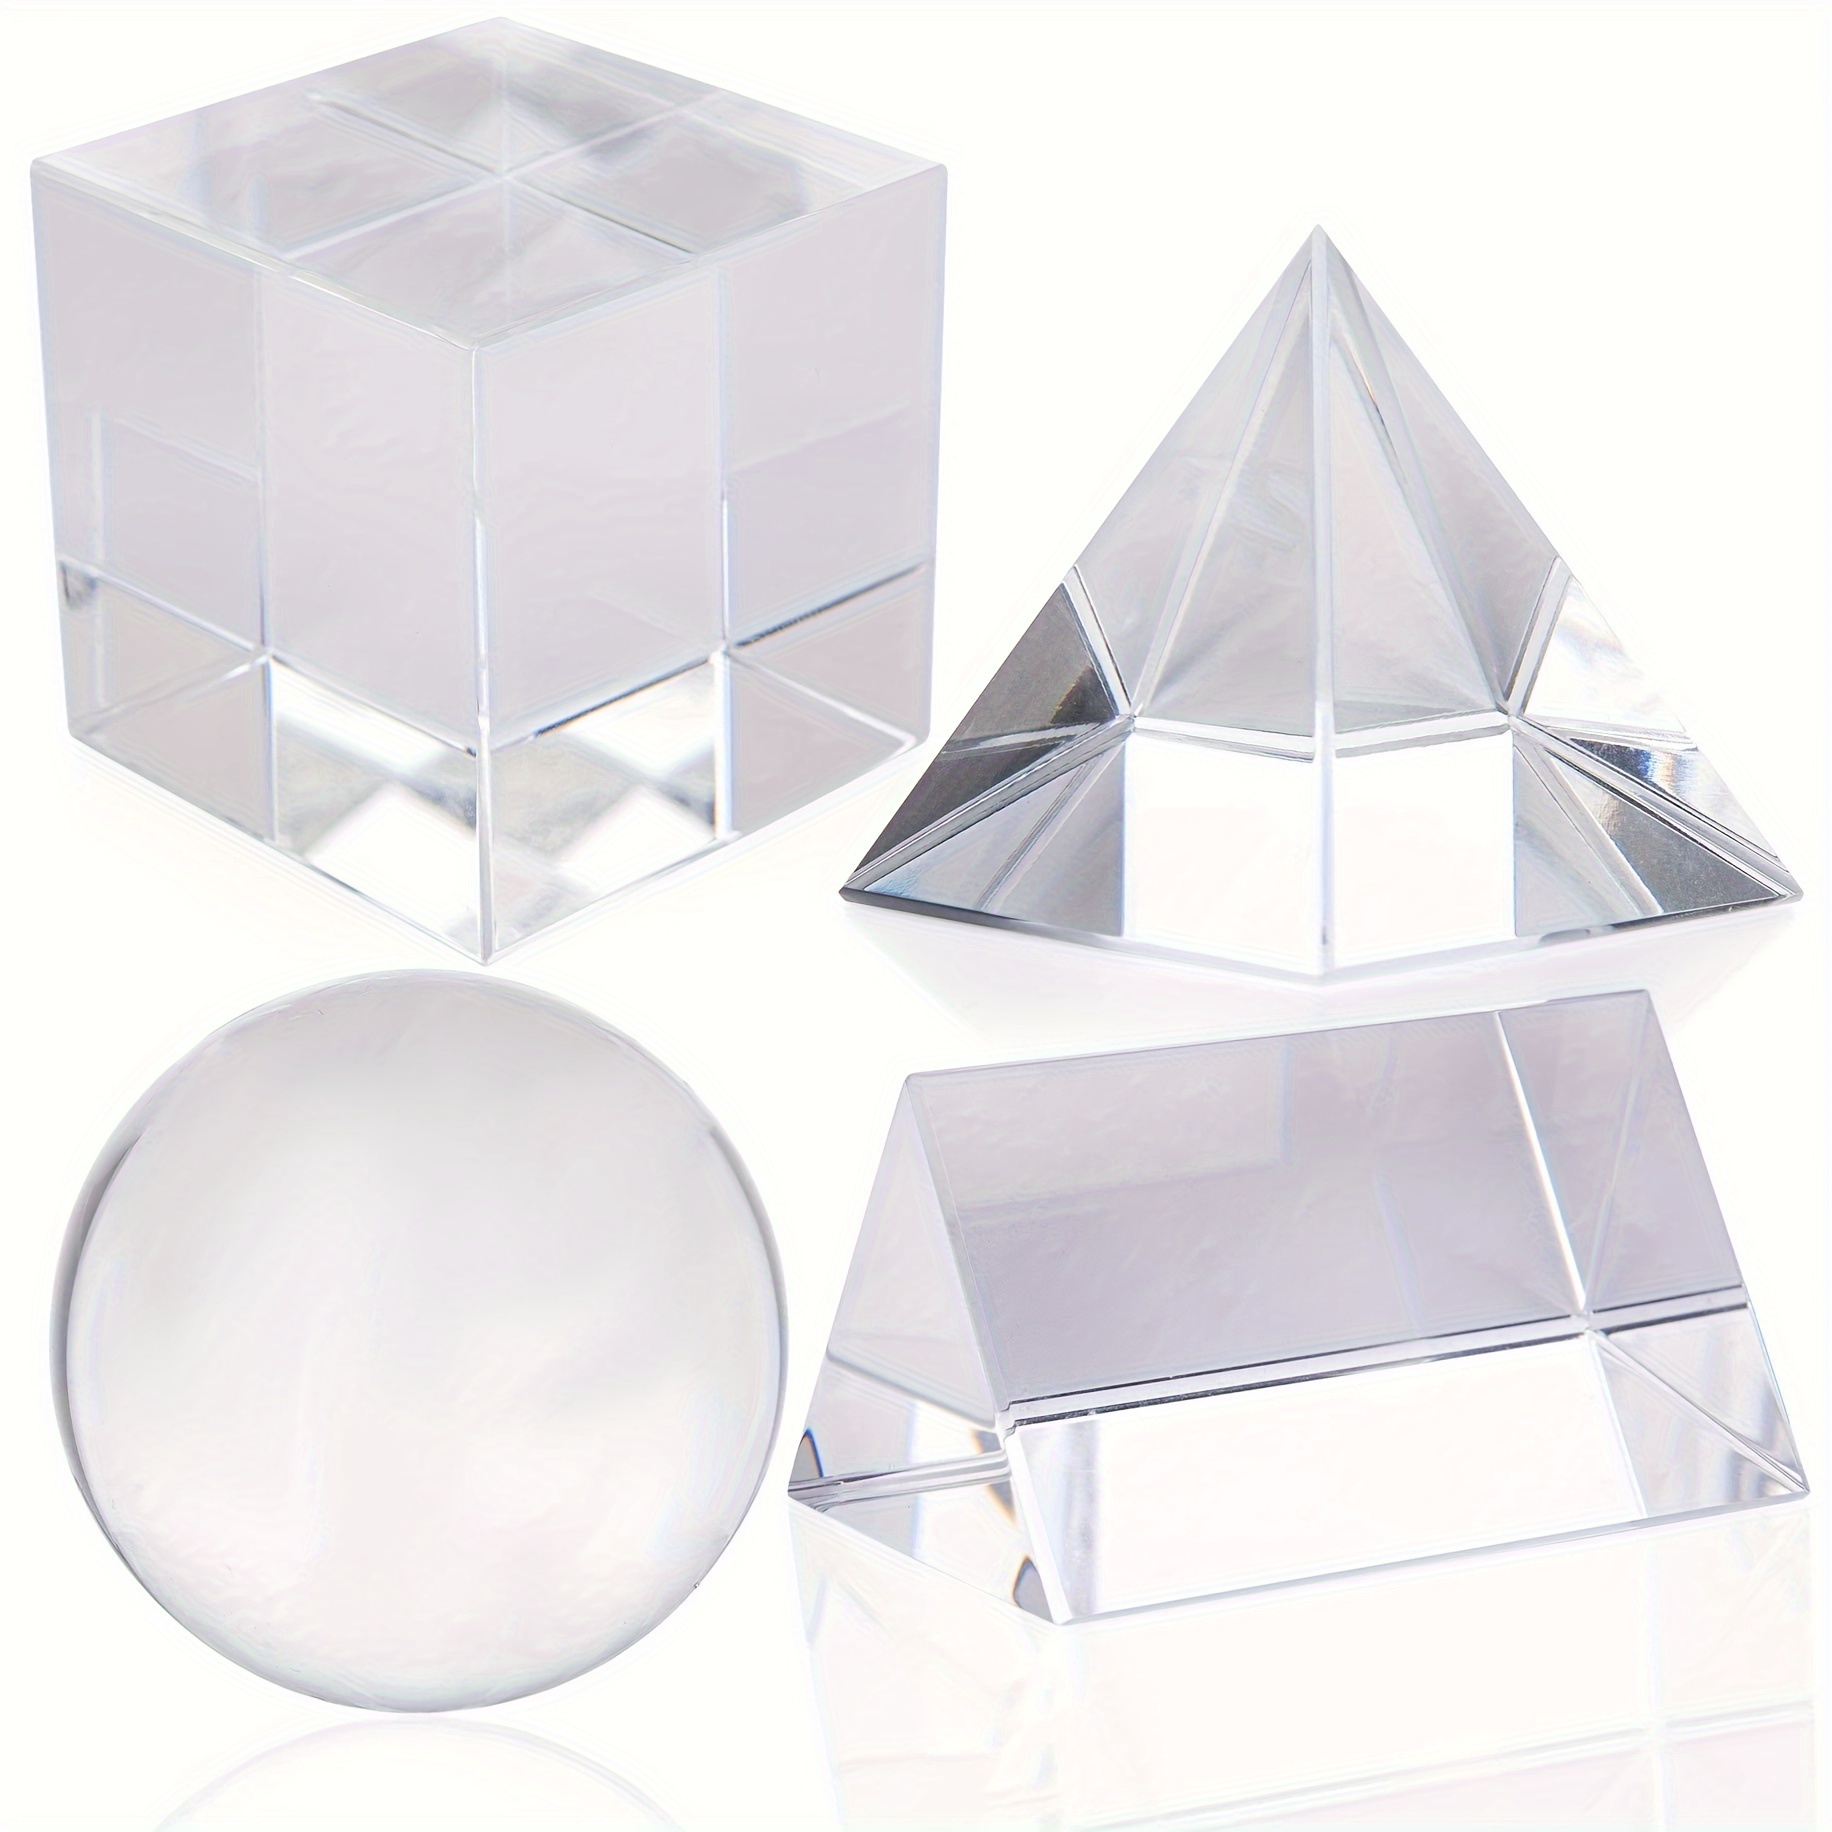 Rainbow Optical Glass Crystal Pyramid Prism Cube Prism for